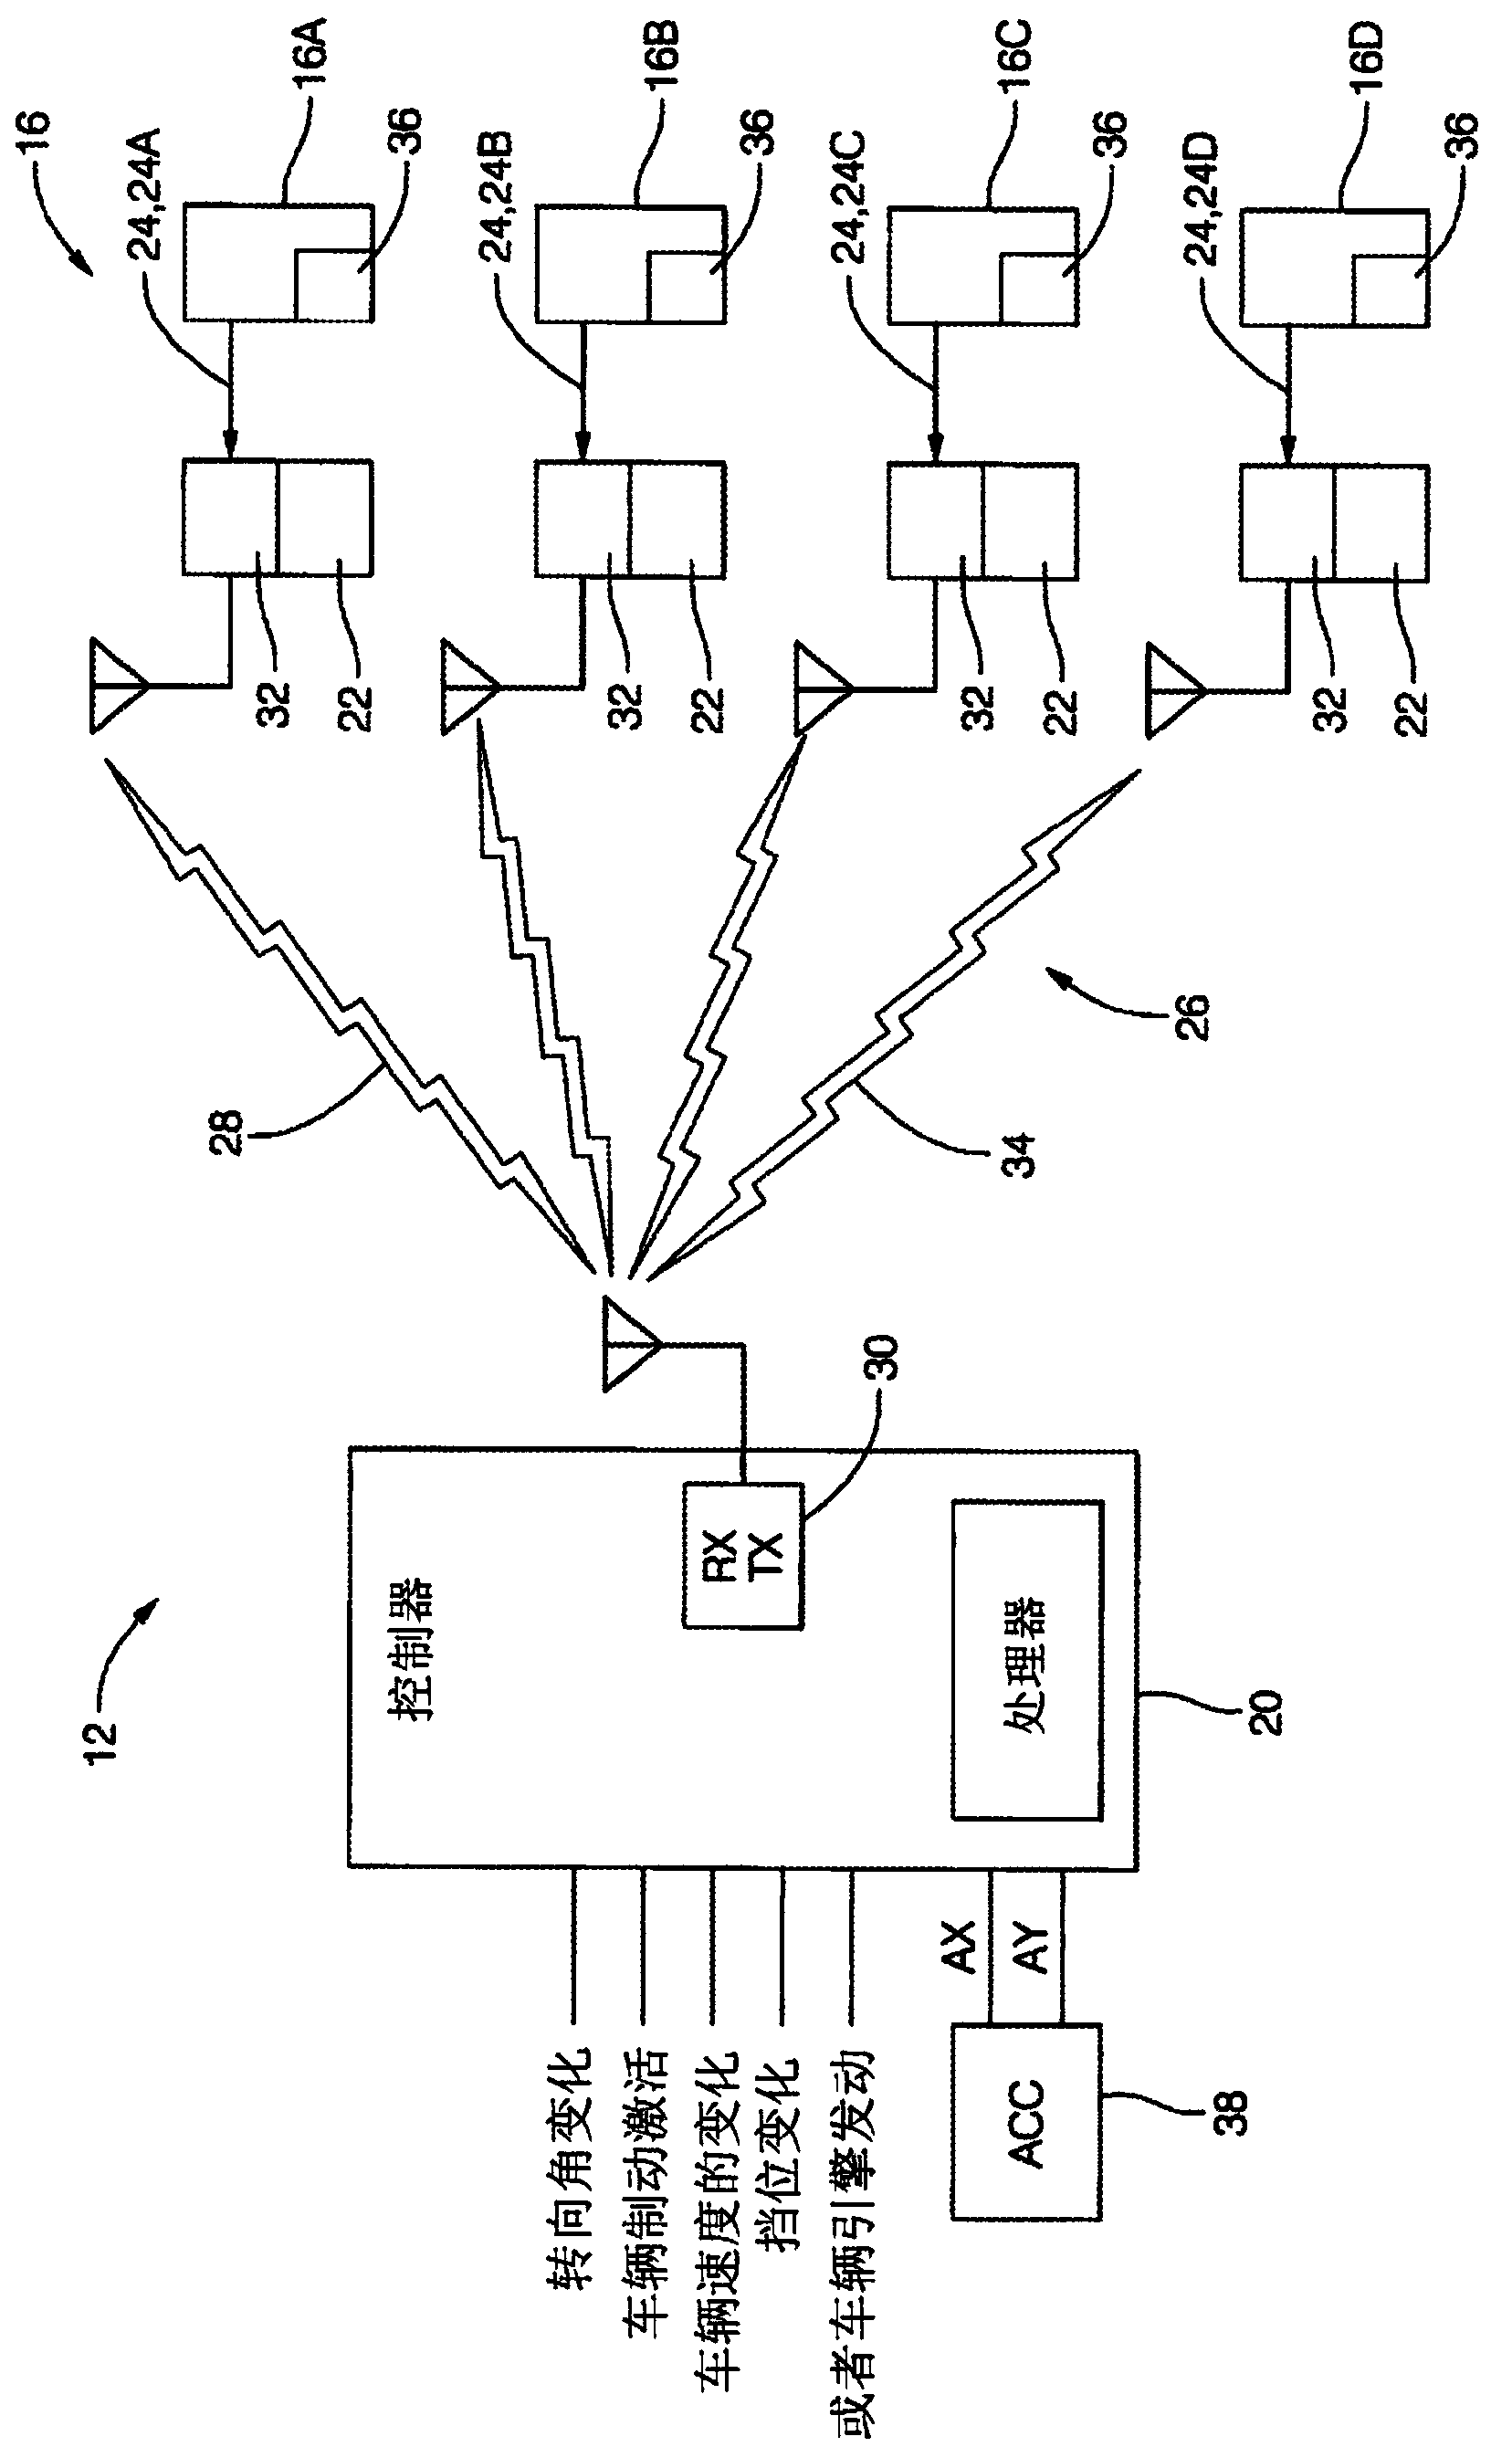 System and method for automatic location assignment of wheels equipped with pressure sensors